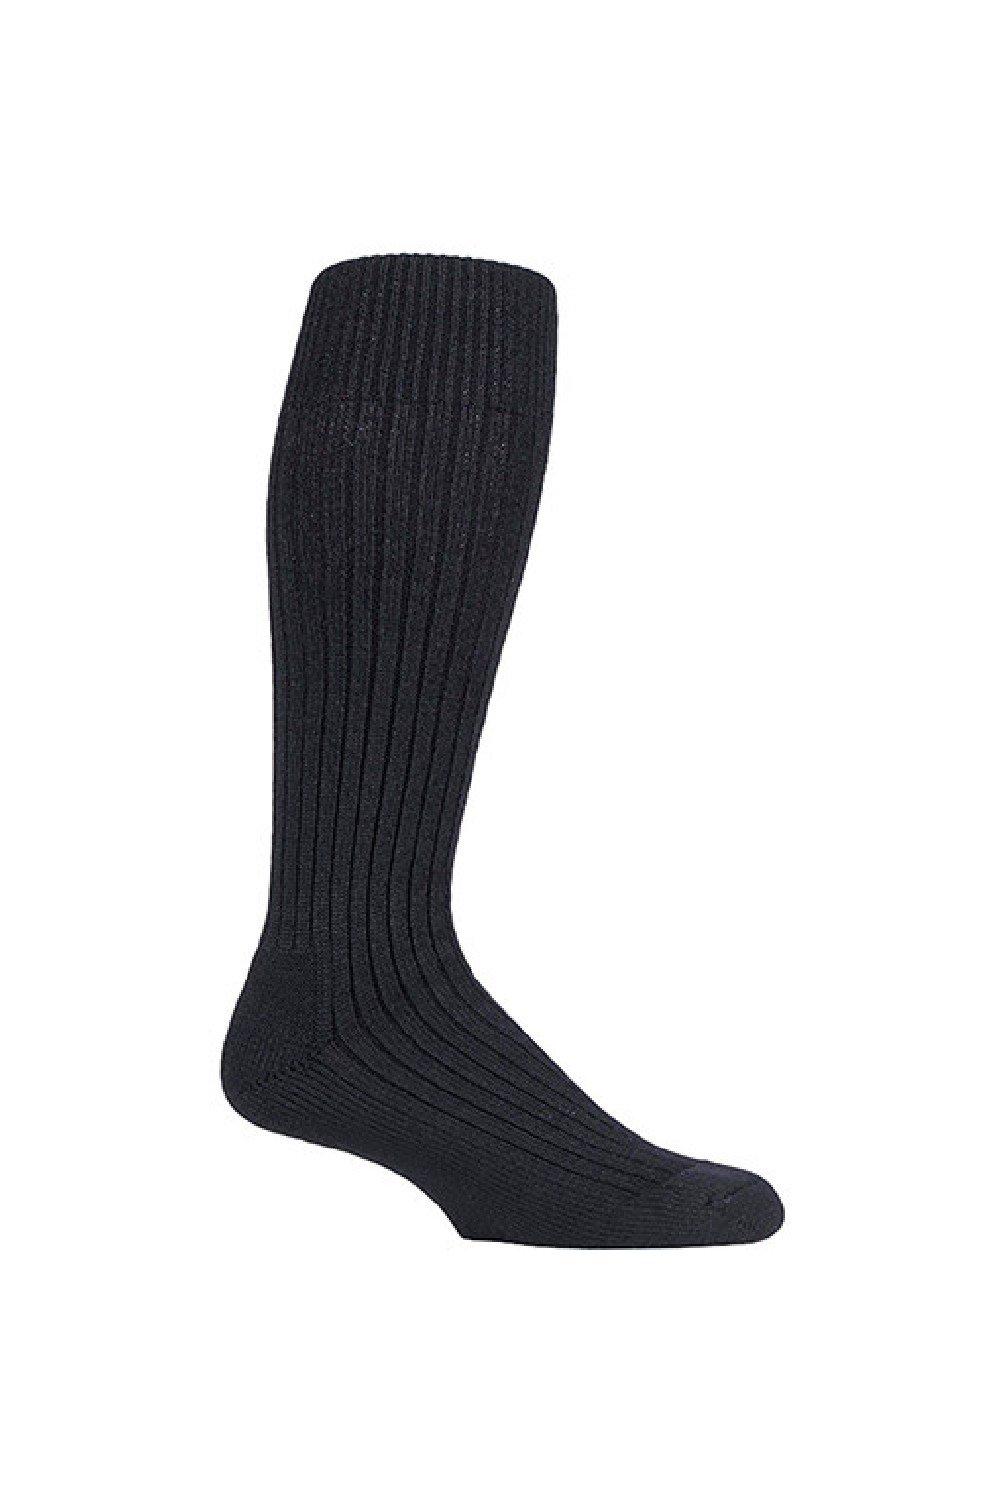 Long Knee High Wool Military Action Army Style Socks for Boots